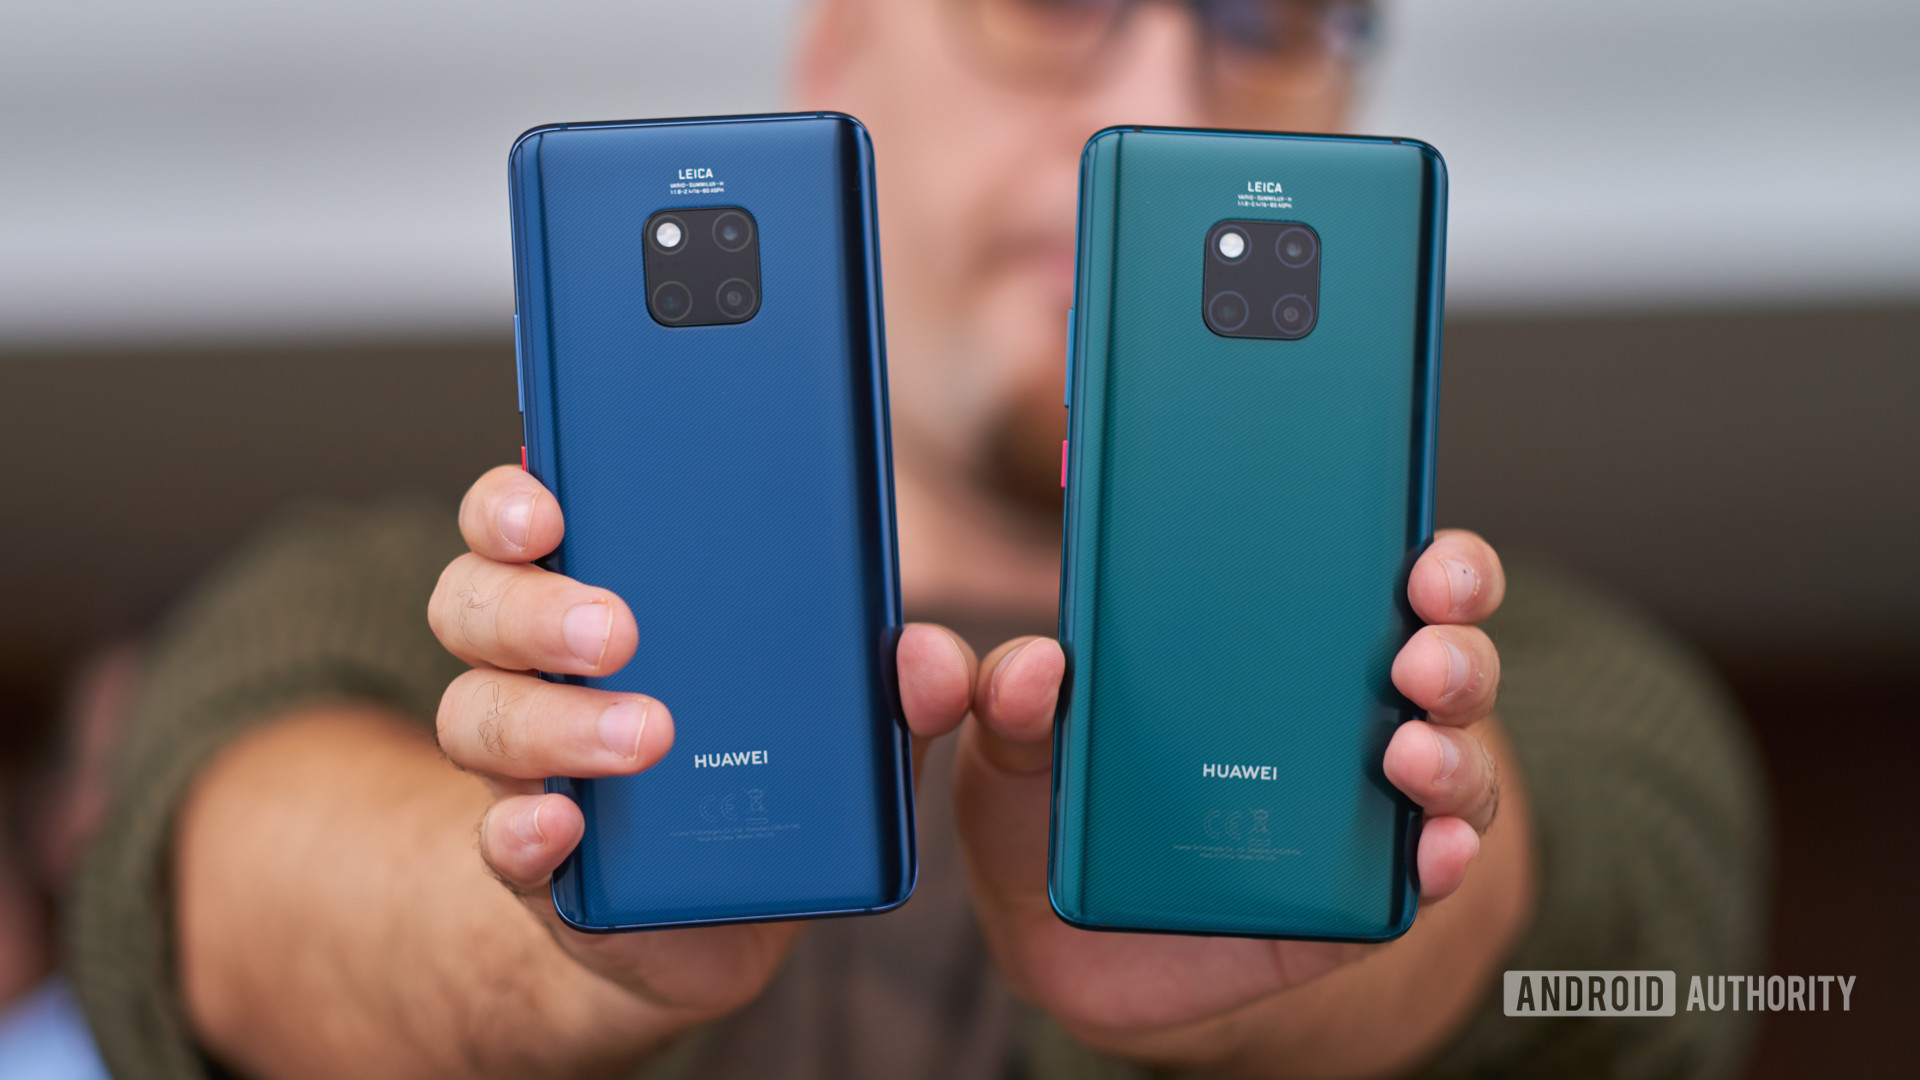 HUAWEI Mate 20 Pro review: The best for users